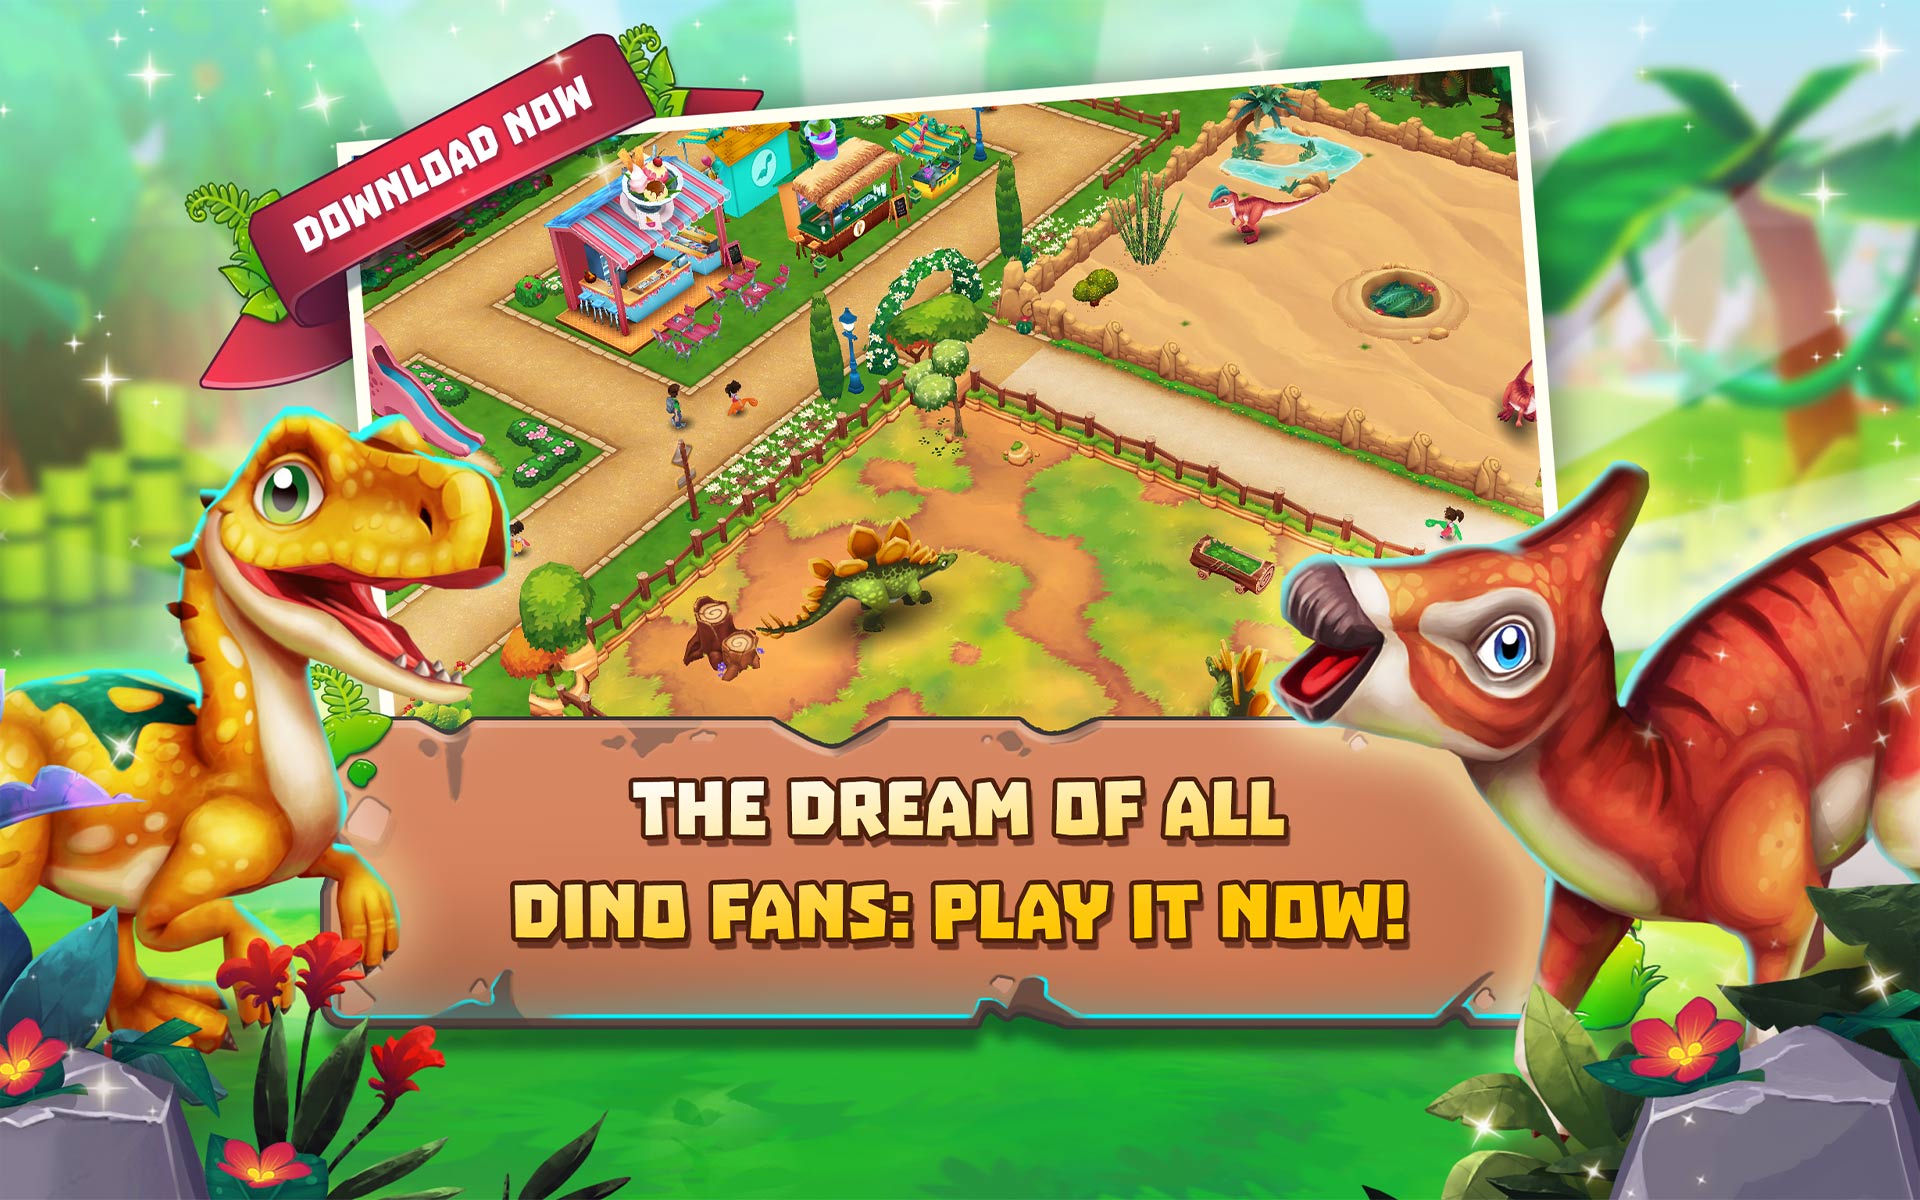 Play Dinosaur Games Online on PC & Mobile (FREE)